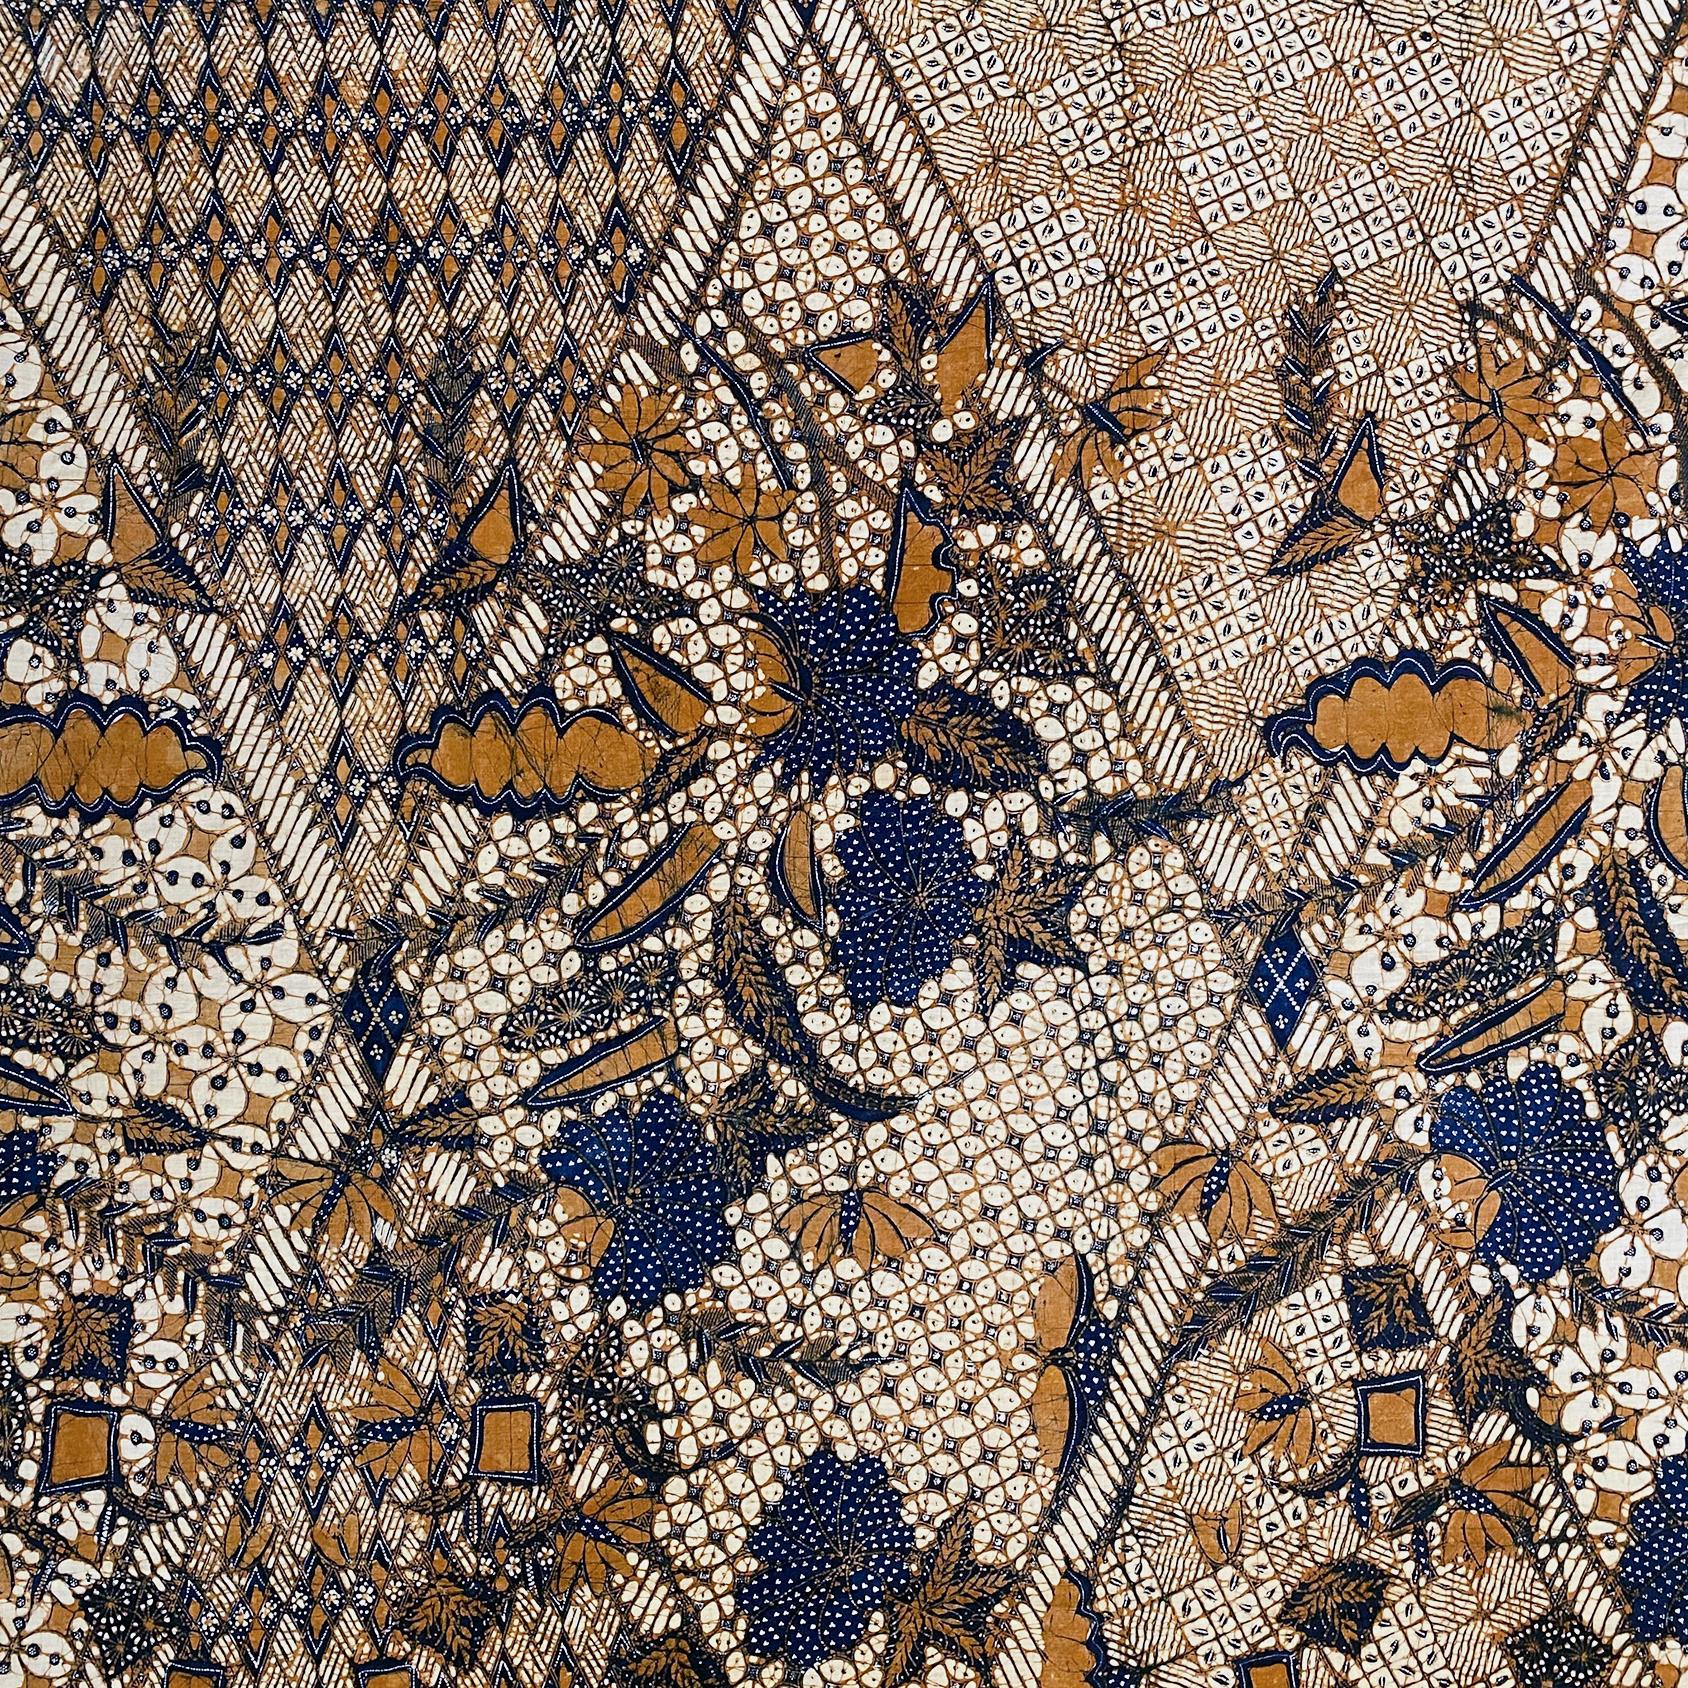 Batik, Kain, hip-wrap clothing garment, java, mid-20th century. Worn by men and women. Blue-black, blue, soga brown, and ecru comprise the color scheme, which are traditional colors of the Yogyakarta and Surakarta area. This kain design consists of